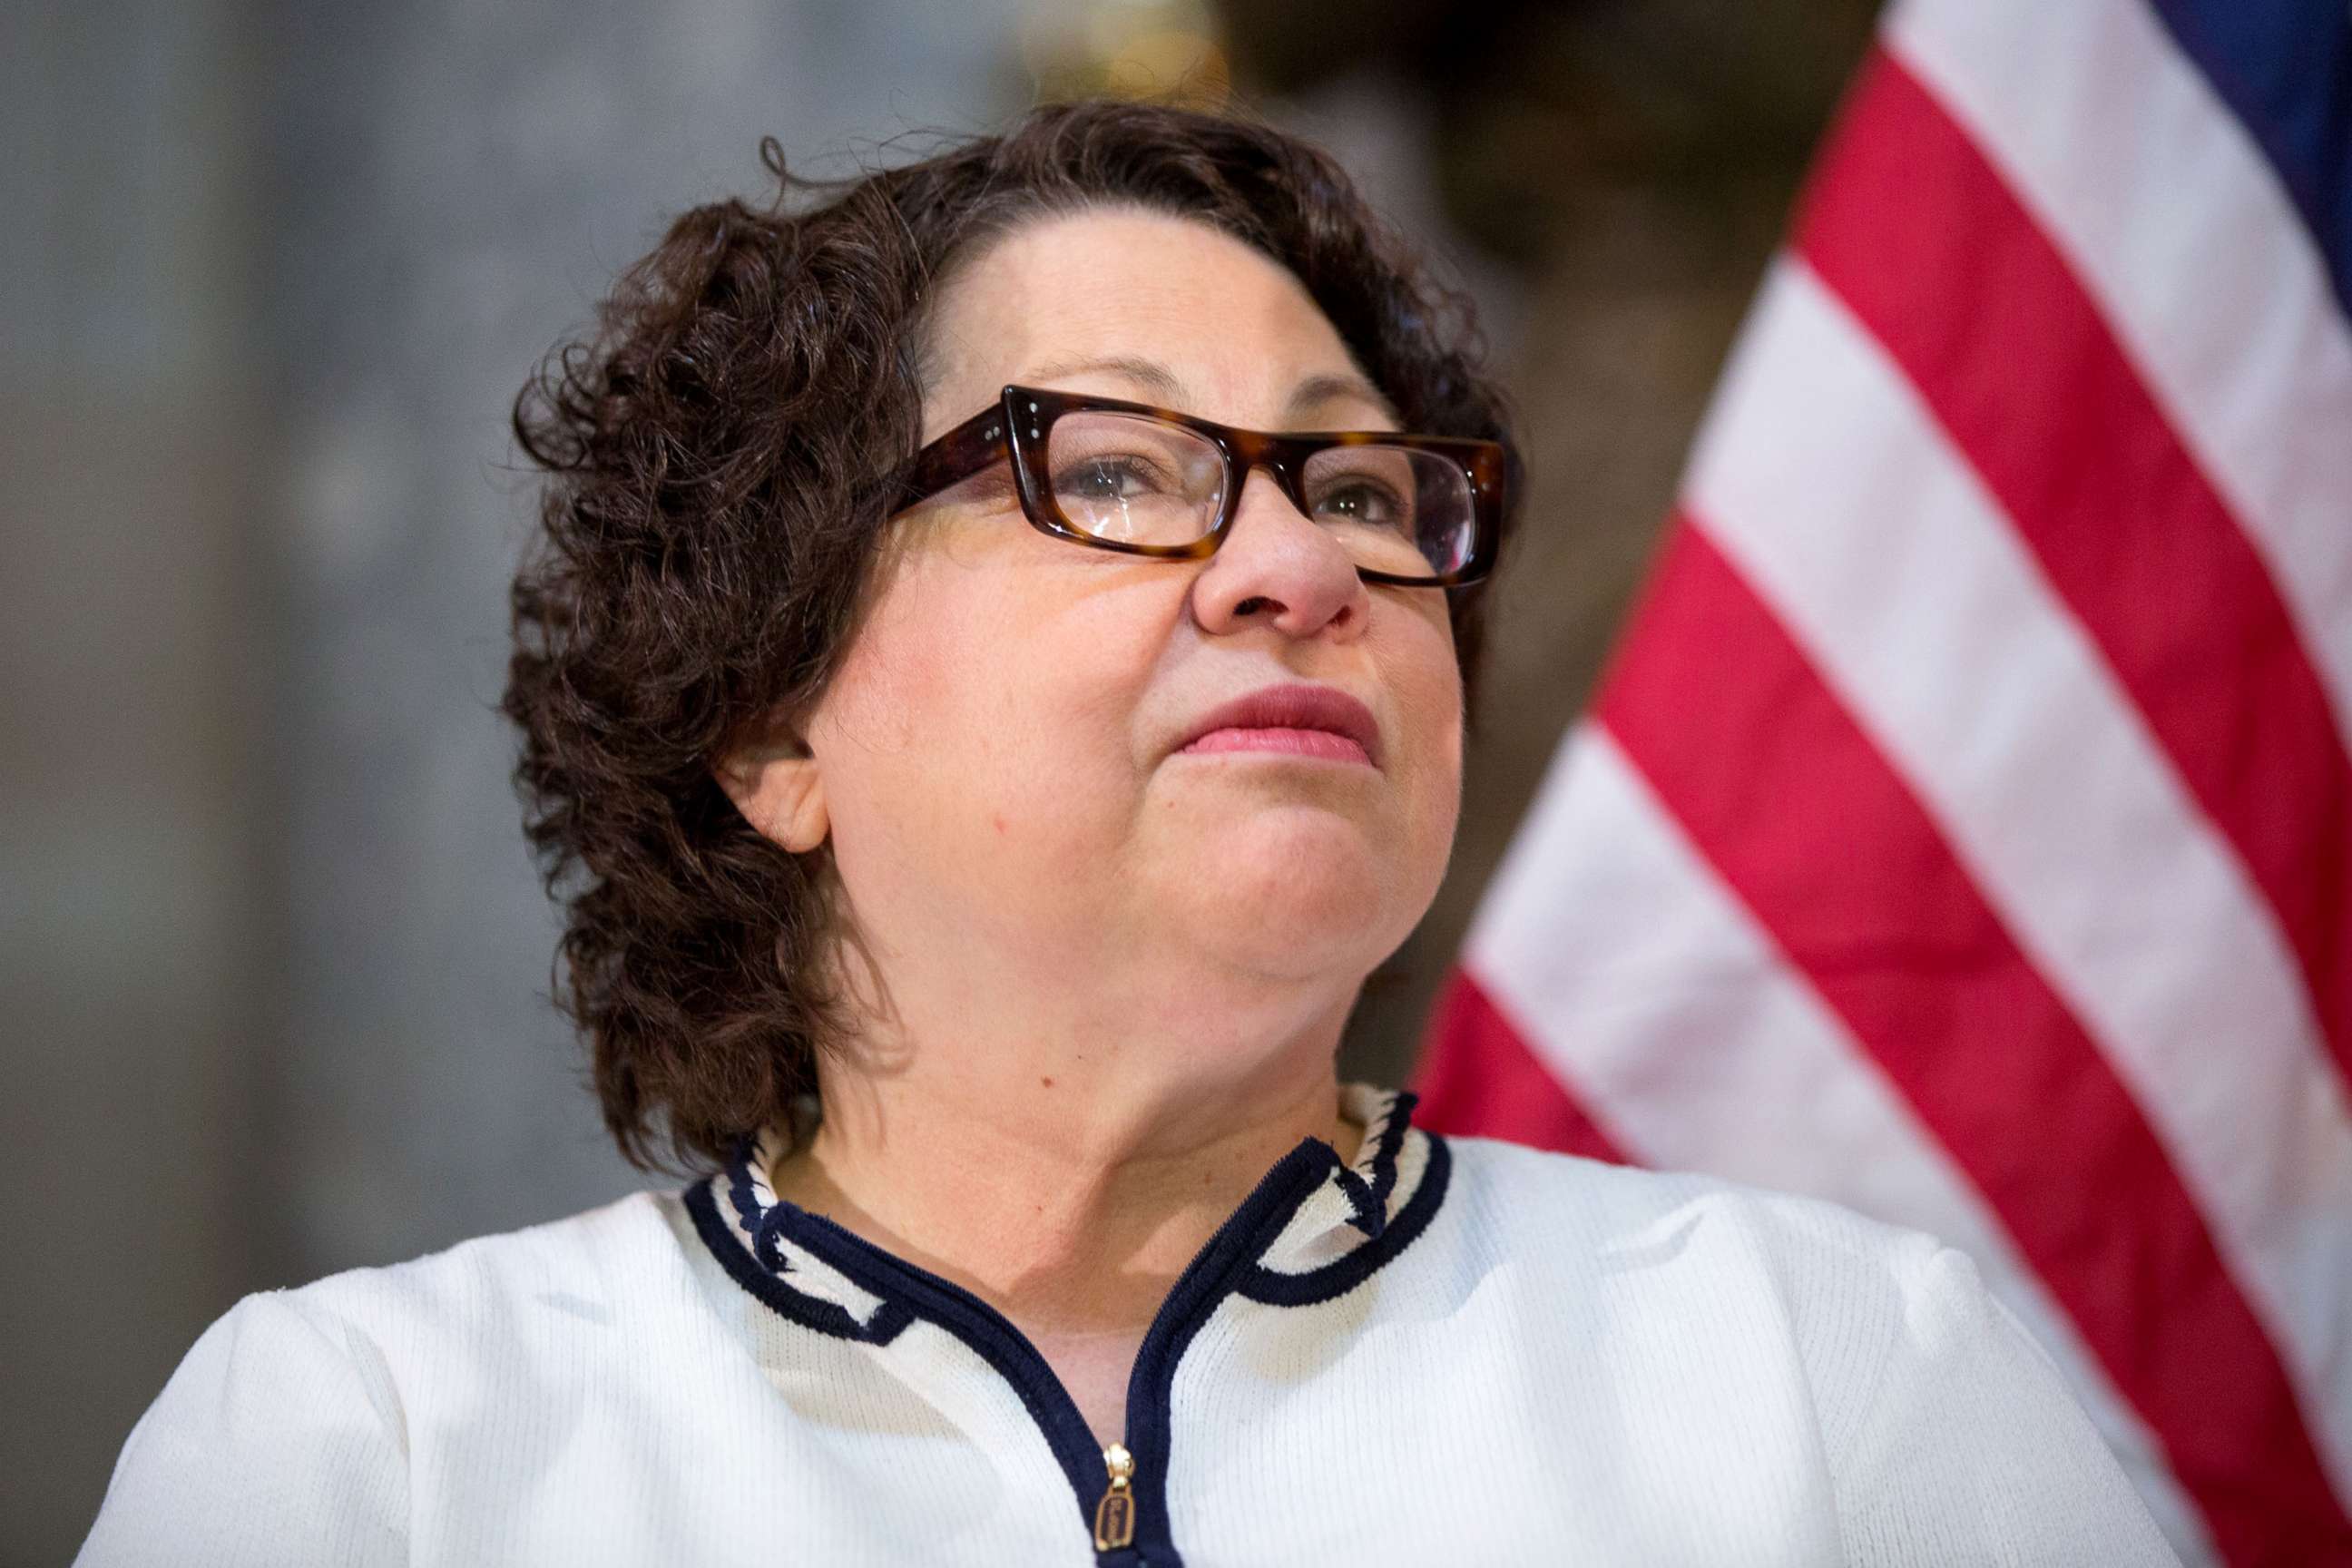 PHOTO: U.S. Supreme Court Justice Sonia Sotomayor participates in an annual Women's History Month reception on Capitol Hill in Washington, March 18, 2015.